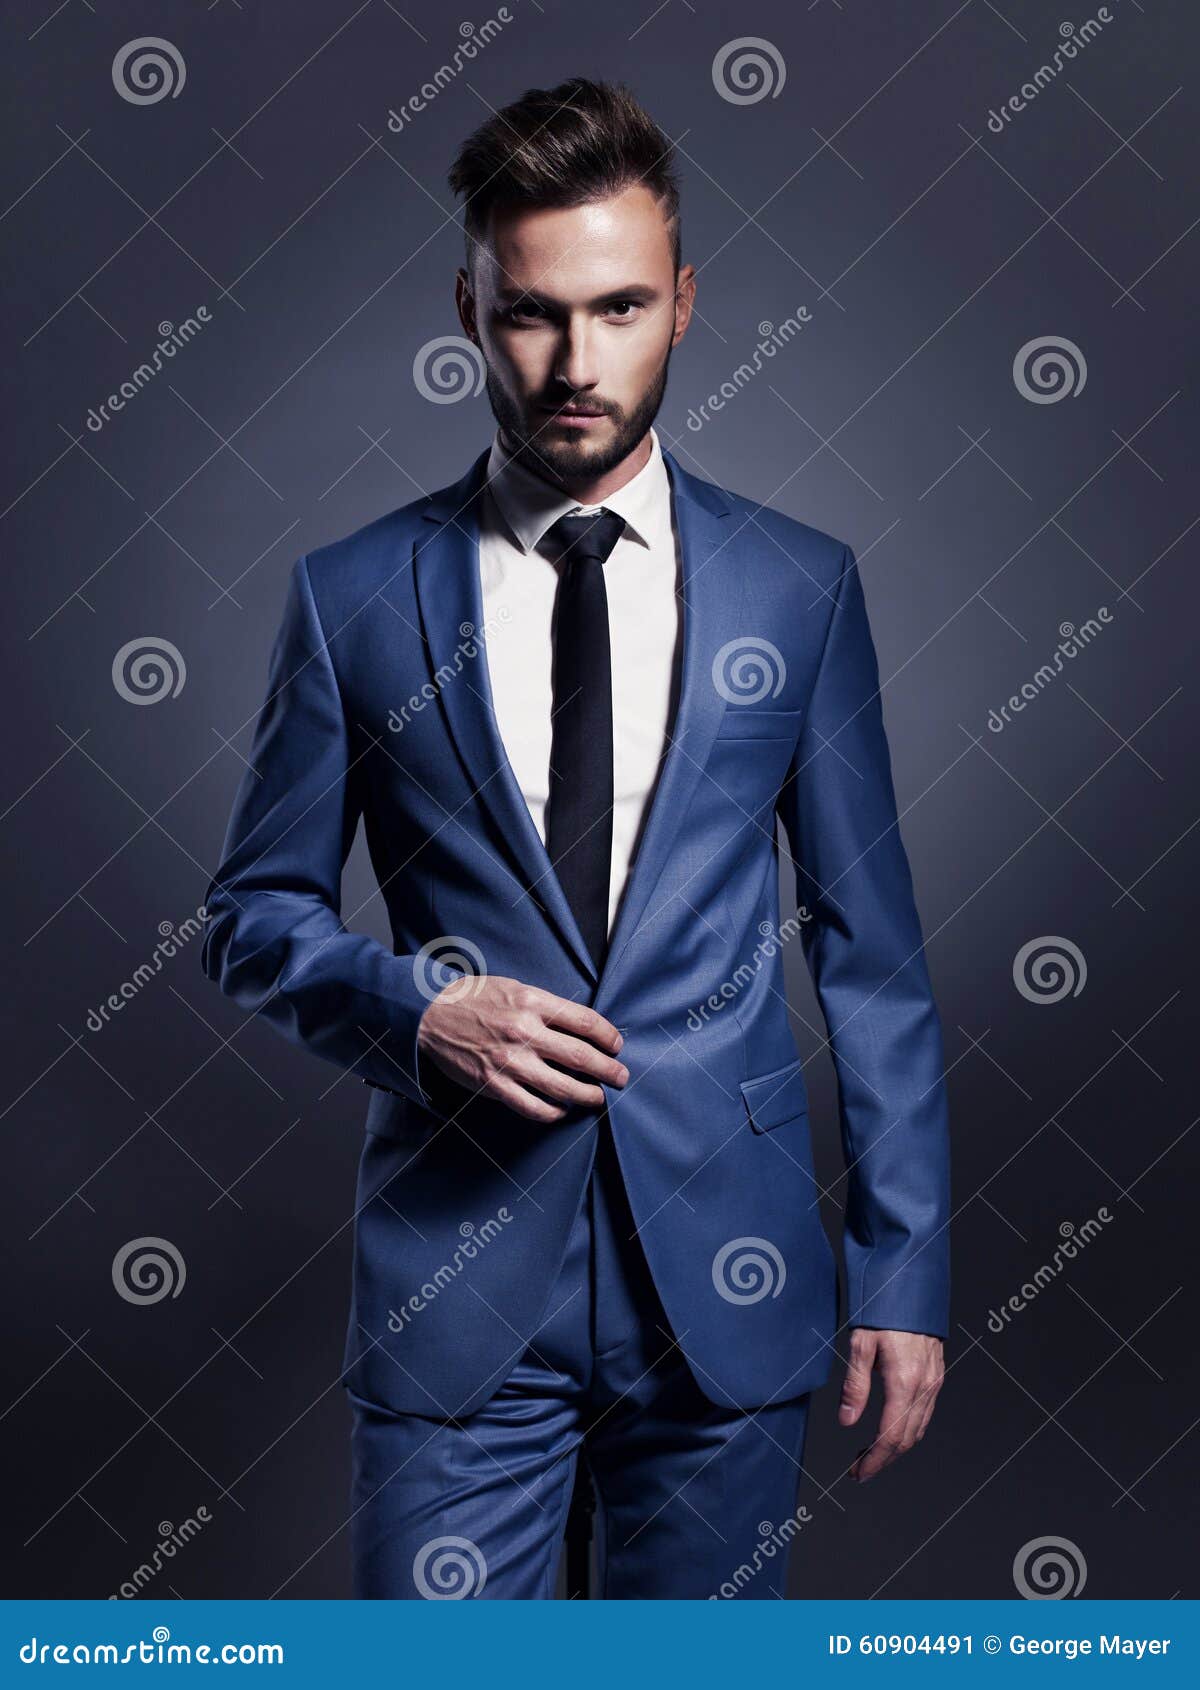 Handsome Stylish Man in Blue Suit Stock Image - Image of fashion ...